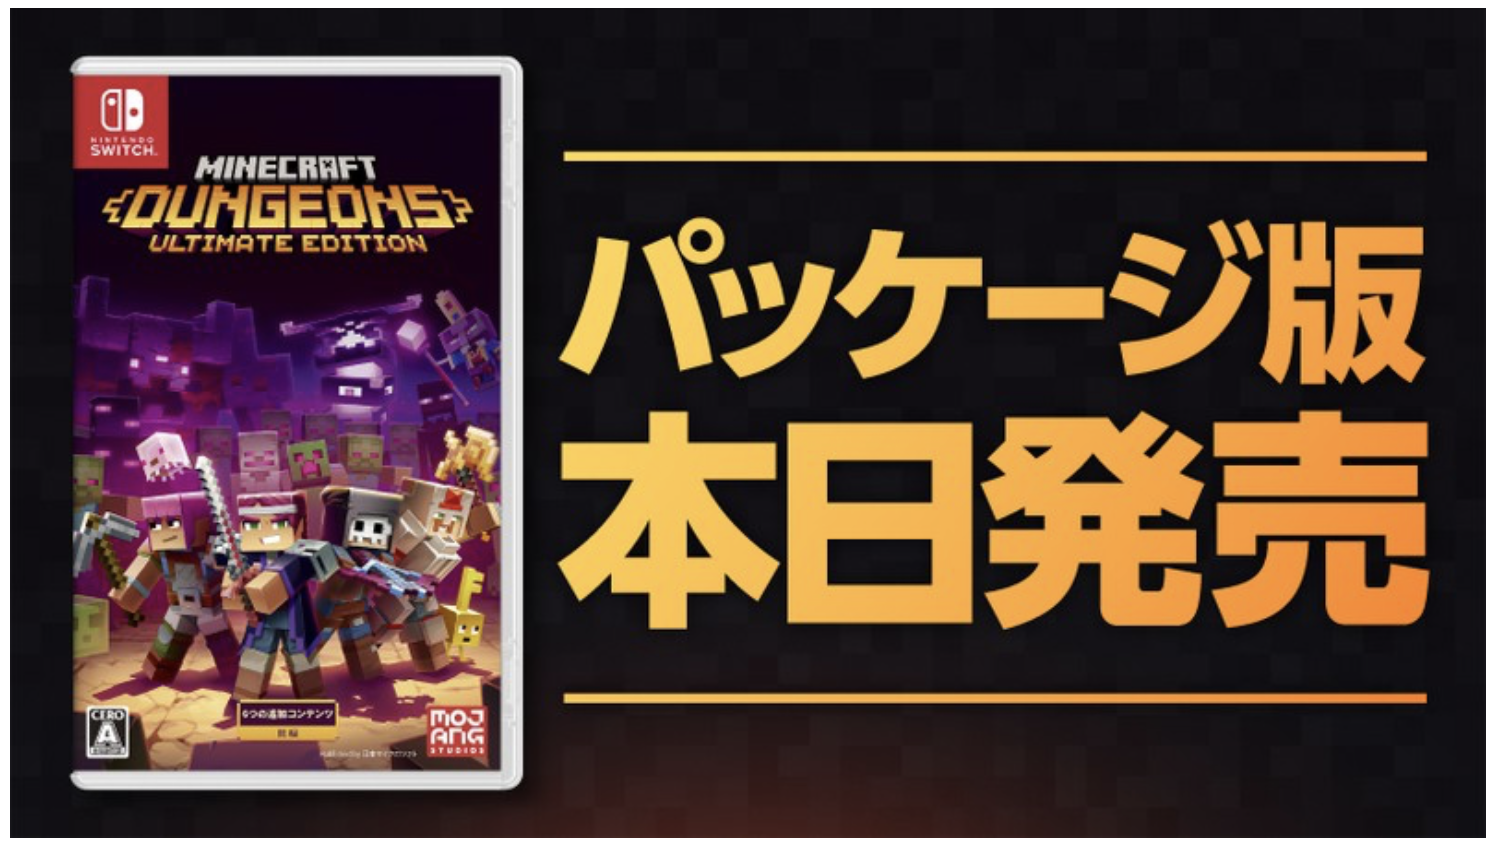 Minecraft Dungeons: Ultimate Edition Available Now Physical In Japan -  TheFamicast.com: Japan-based Nintendo Podcasts, Videos & Reviews!